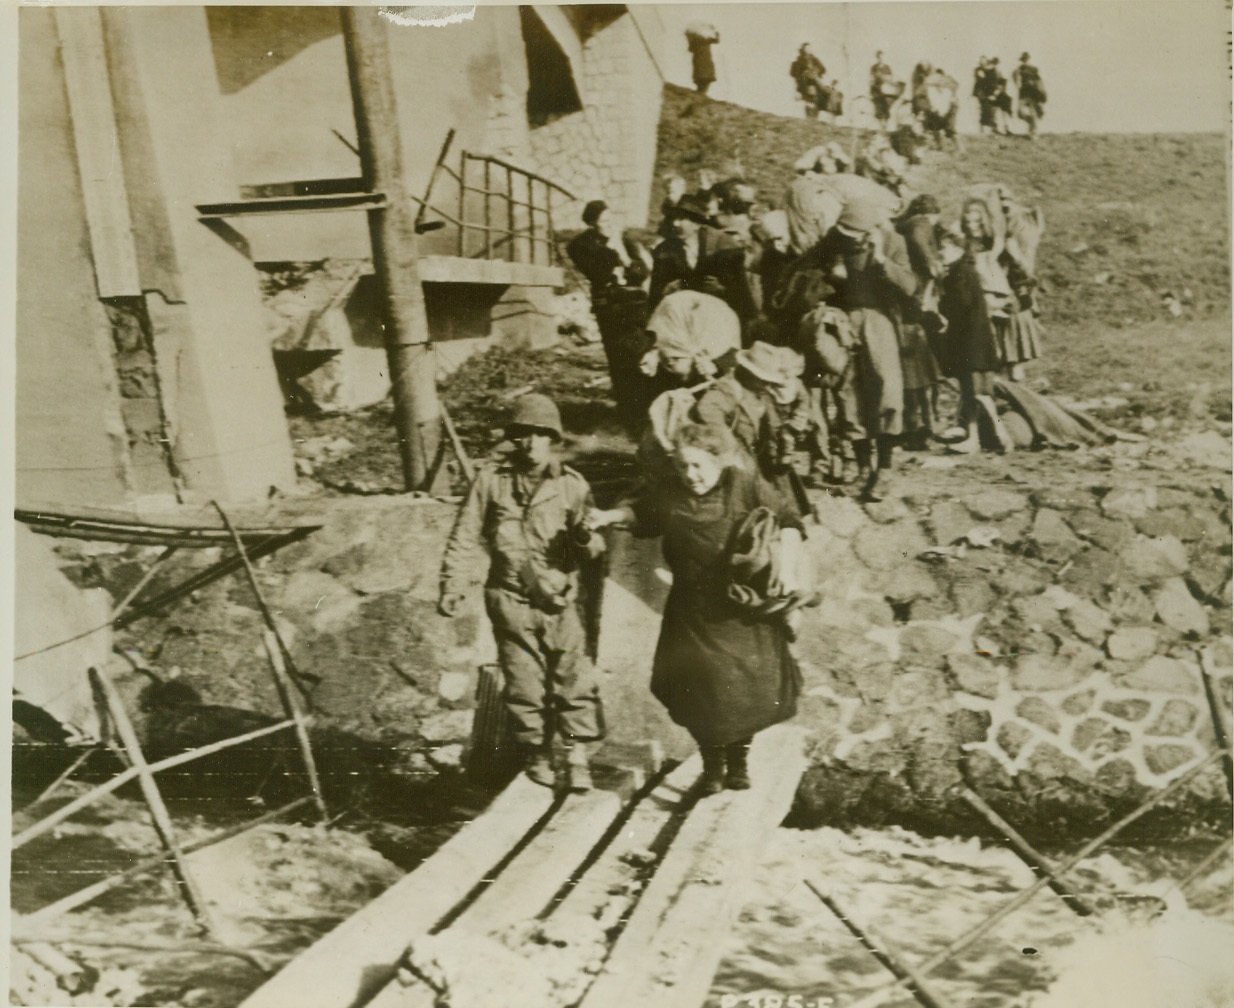 Yanks Lend a Hand, 2/4/1944. Italy – Pfc Manuel Martins of New Jersey lends a helping hand to an aged Italian woman crossing a makeshift bridge in the Mussolini Canal Sector of Italy. Behind them are other refugees, making their way back to their homes in territory now occupied by the Yanks. Credit: (ACME photo by Charles Seawood for the War Picture Pool, transmitted via U.S. Army Signal Corps Radiotelephoto);